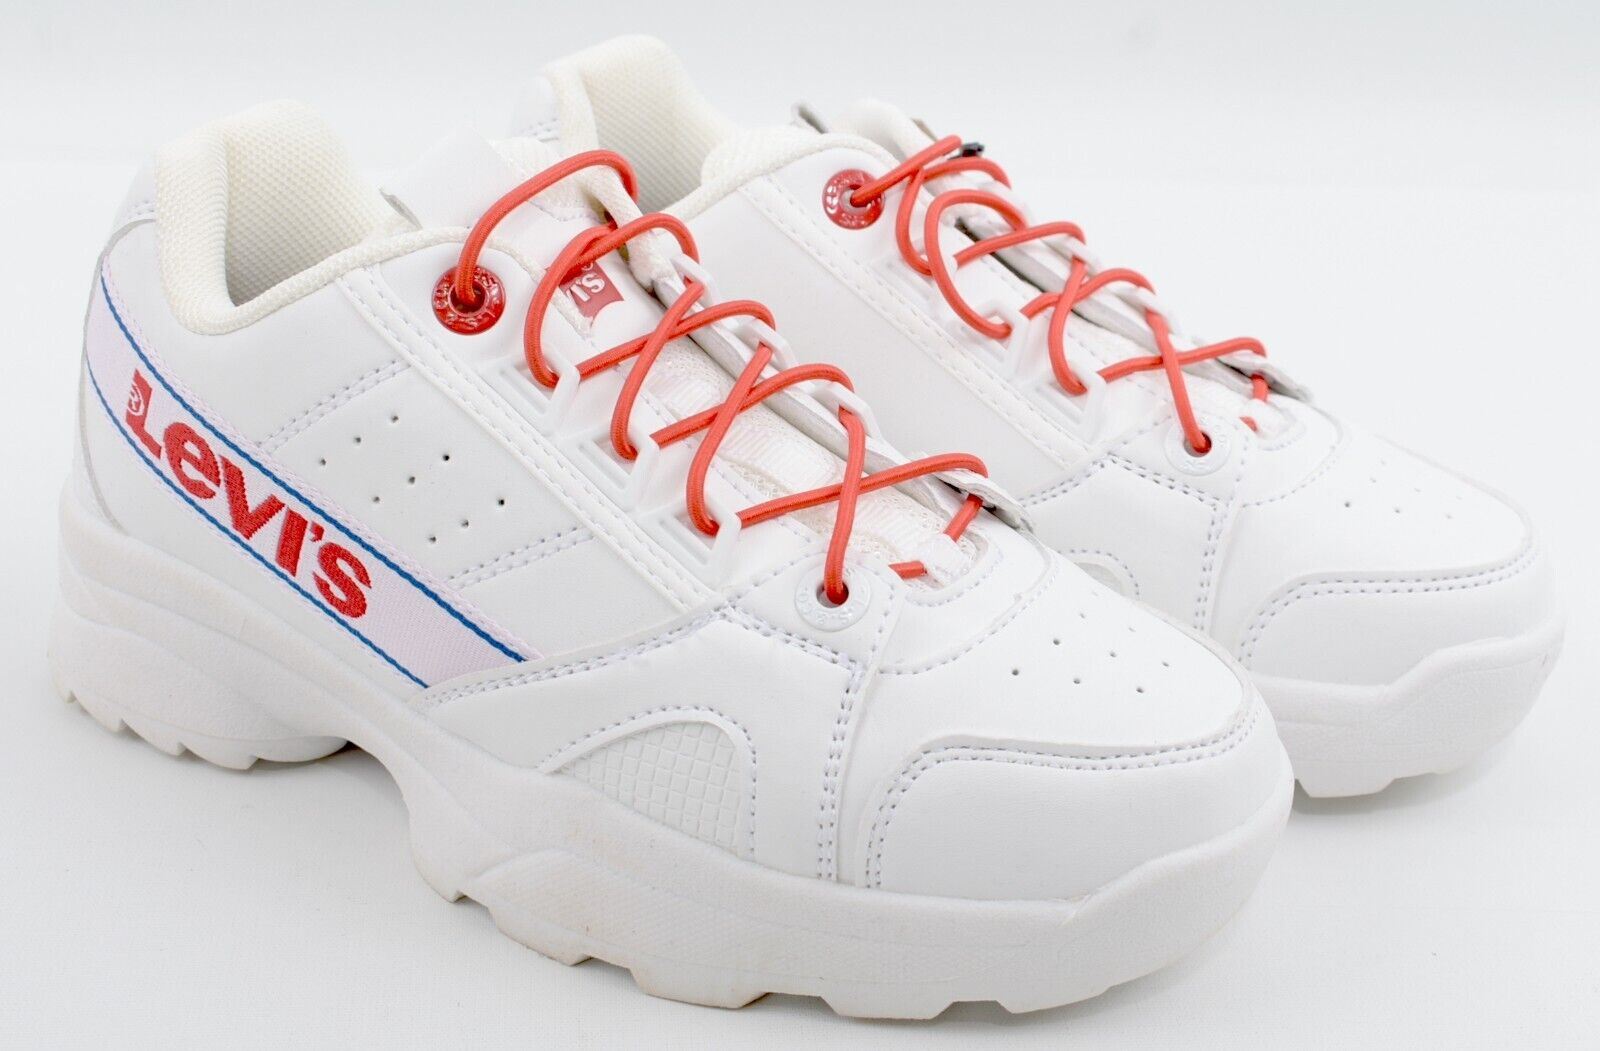 LEVI'S Kids Girls SOHO Trainers, White with Red Laces, size UK 1 / EU 33